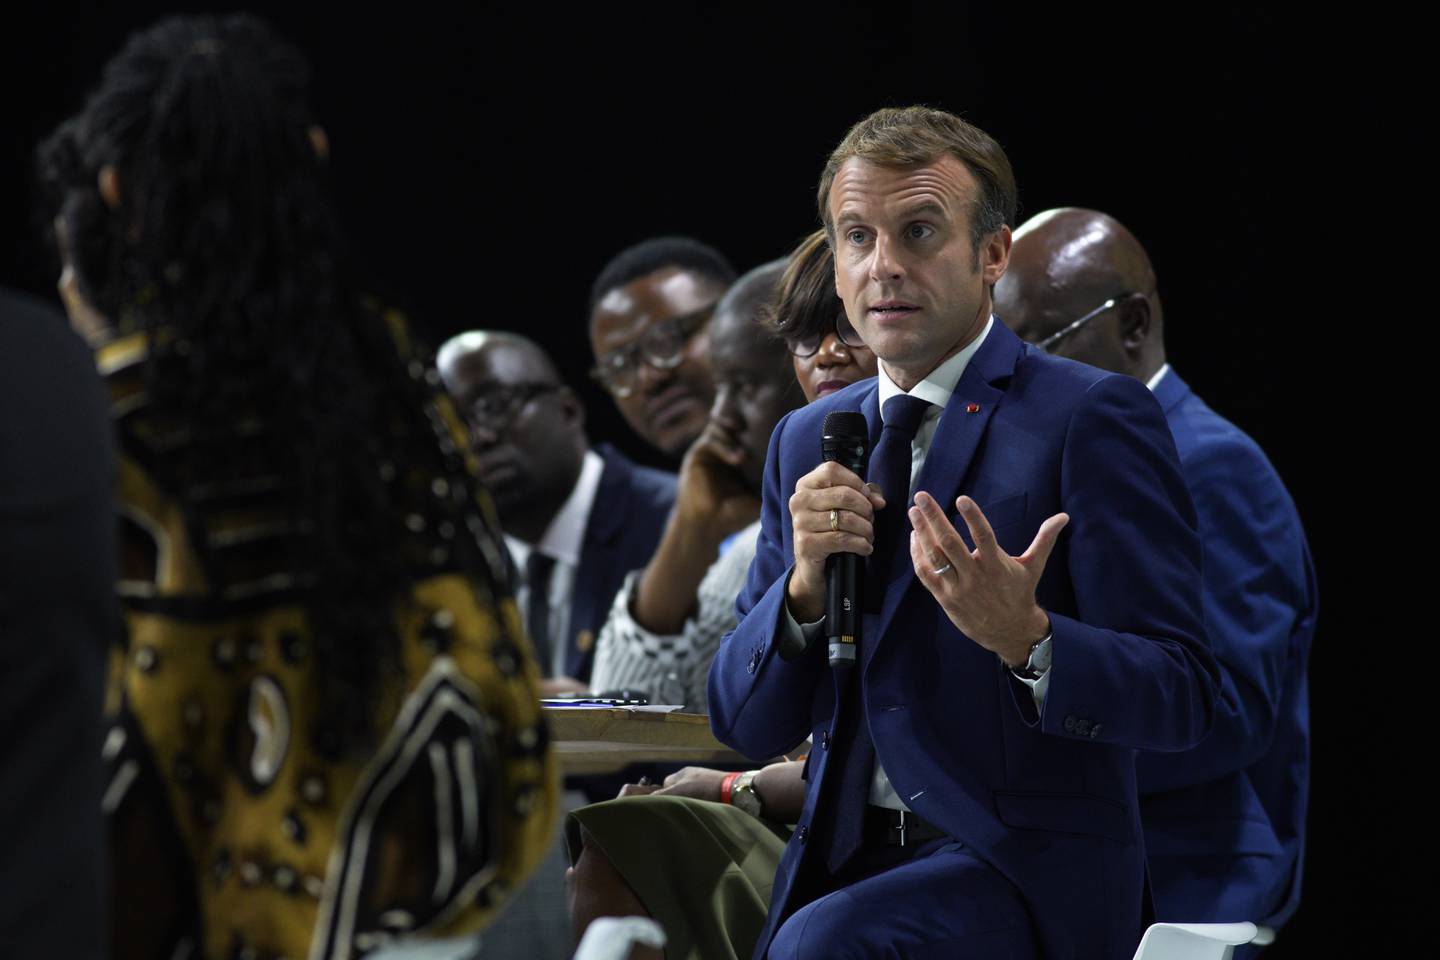 French President Emmanuel Macron attends the New Africa-France 2021 Summit, in Montpellier on Friday. Macron's statements about colonialism have been mixed. AP Photo